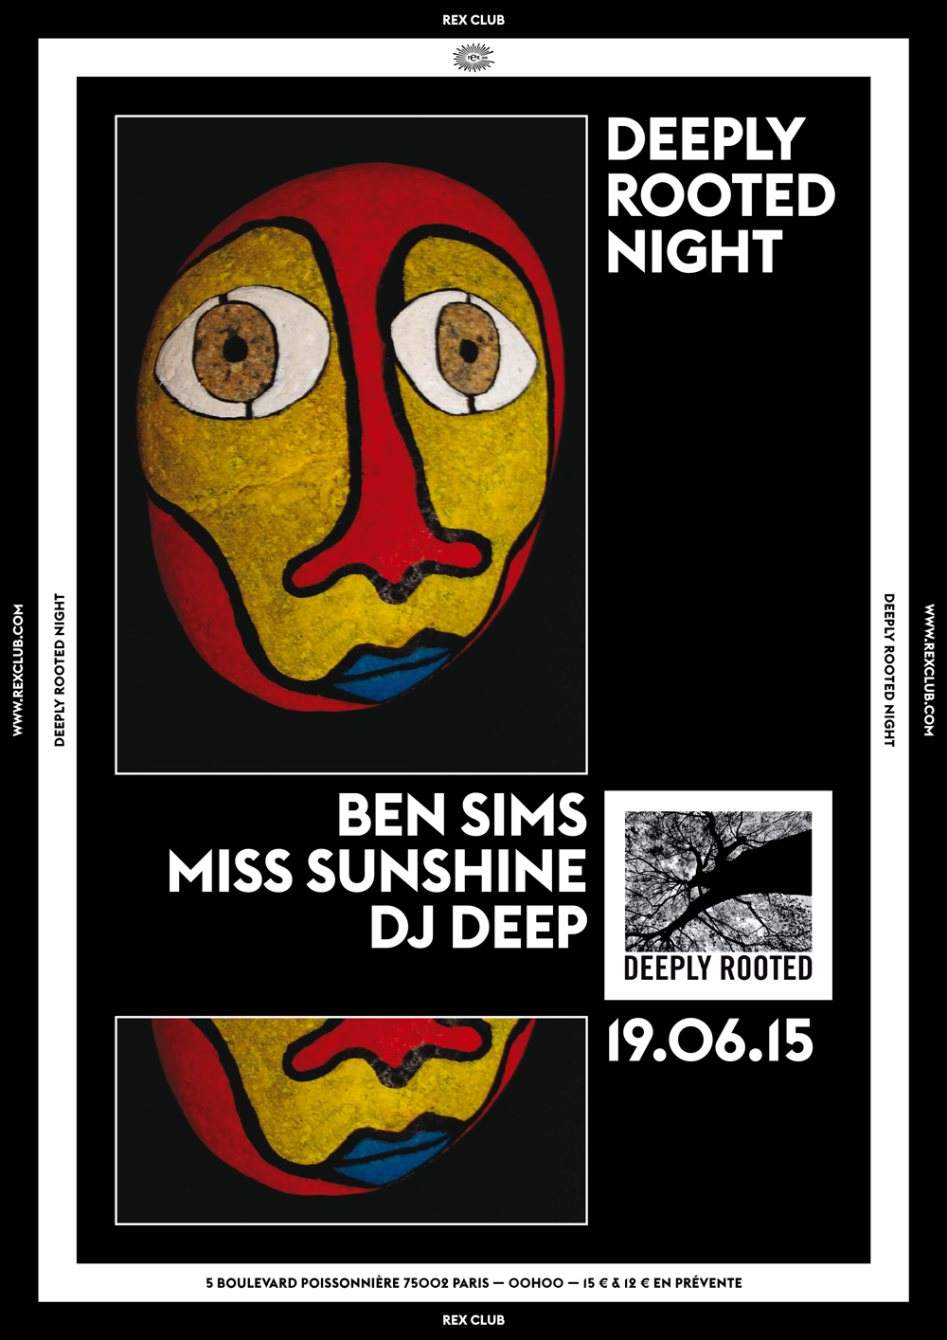 Deeply Rooted: Ben Sims, Miss Sunshine, DJ Deep - フライヤー表